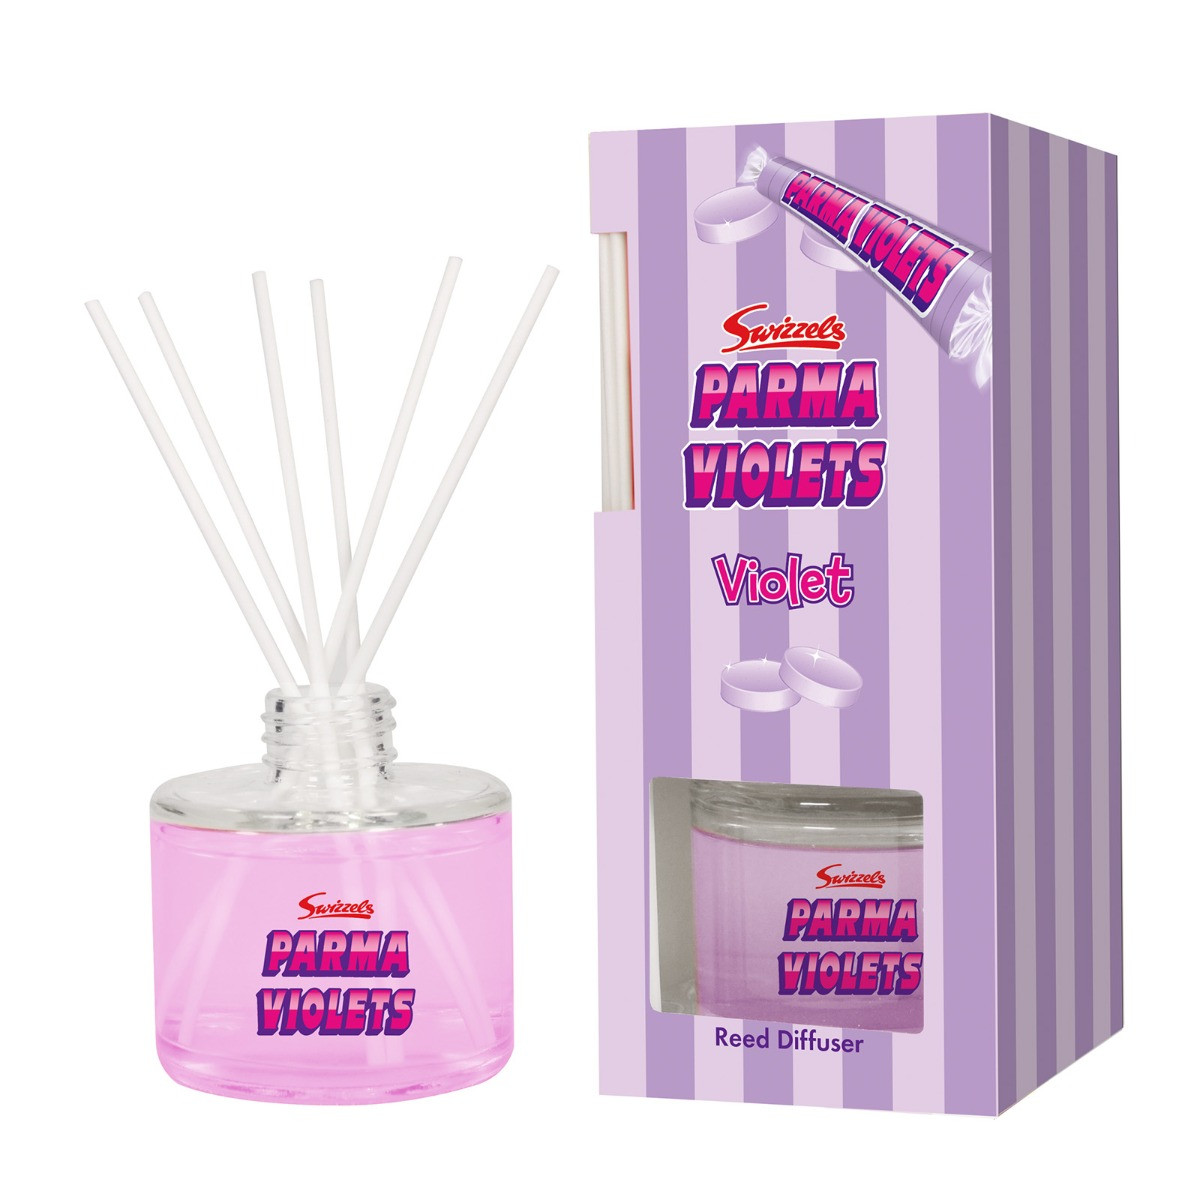 Swizzels 100ml Reed Diffuser - Parma Violets>